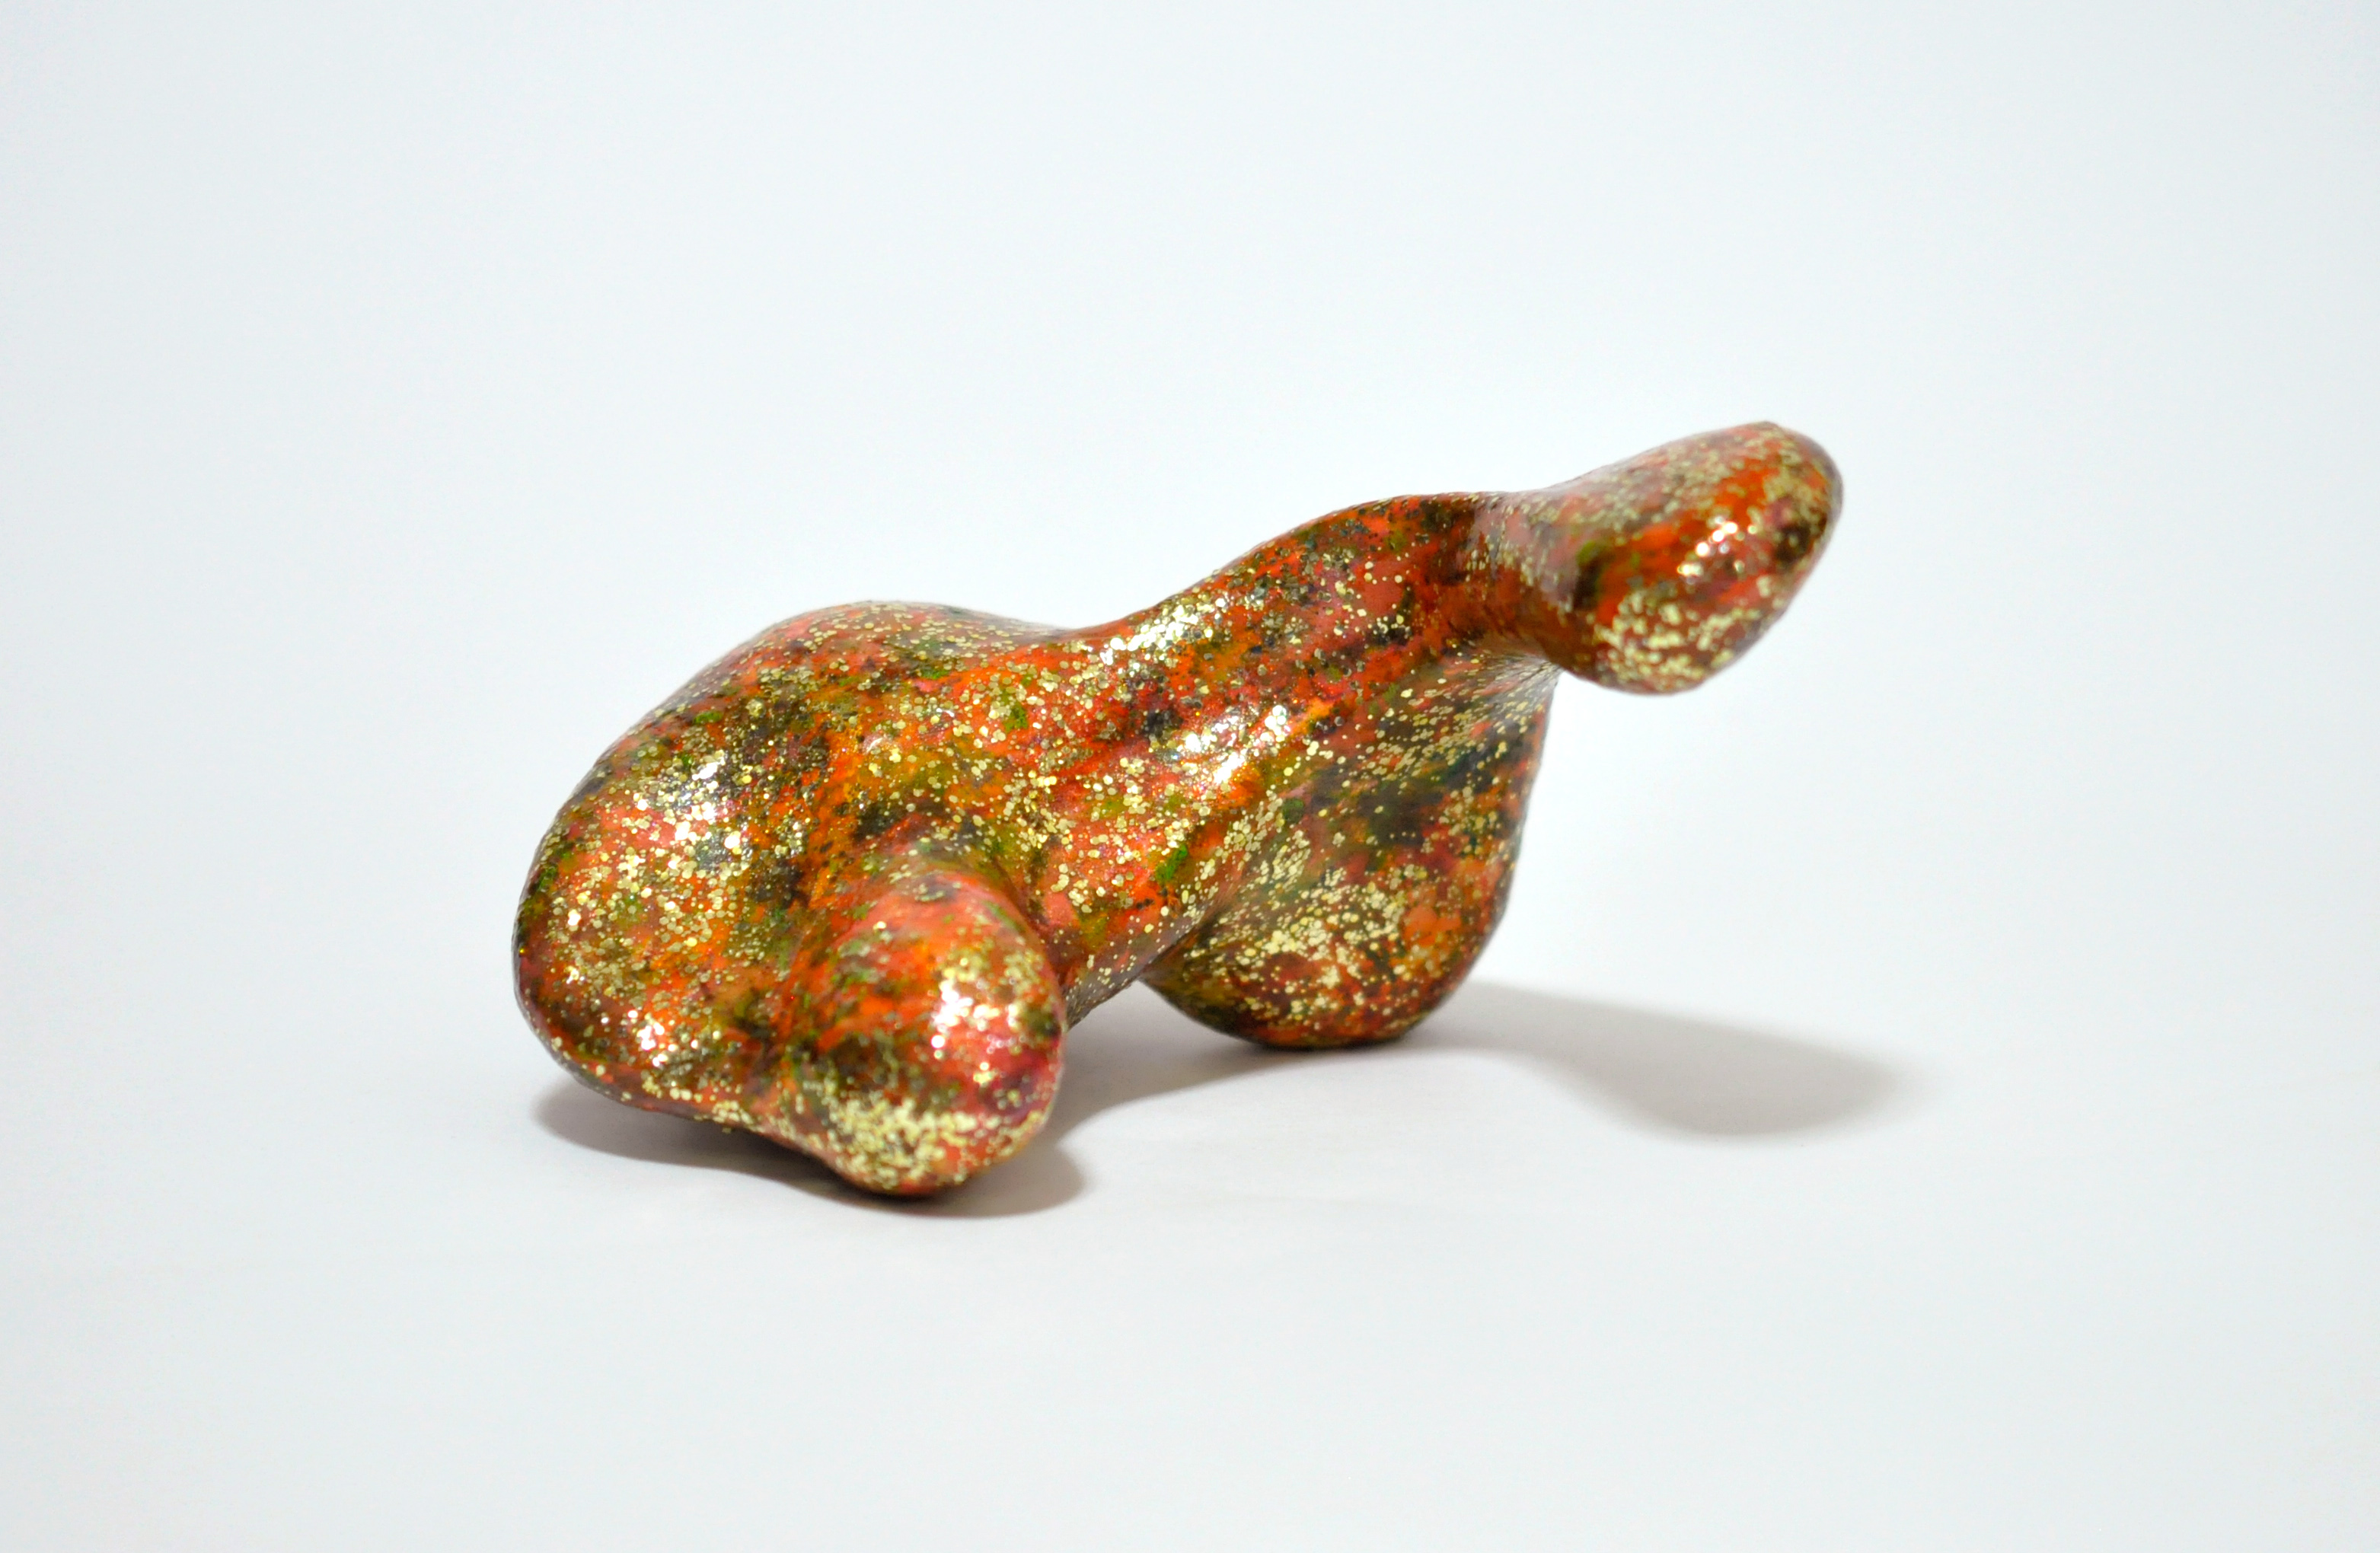 A Touch, 2012, Oil, Nail Polish, and Varnish on Clay, 3.1 x 6.1 x 4.9 in. / 8 x 15.5 x 12.5 cm [#SS12SC025]